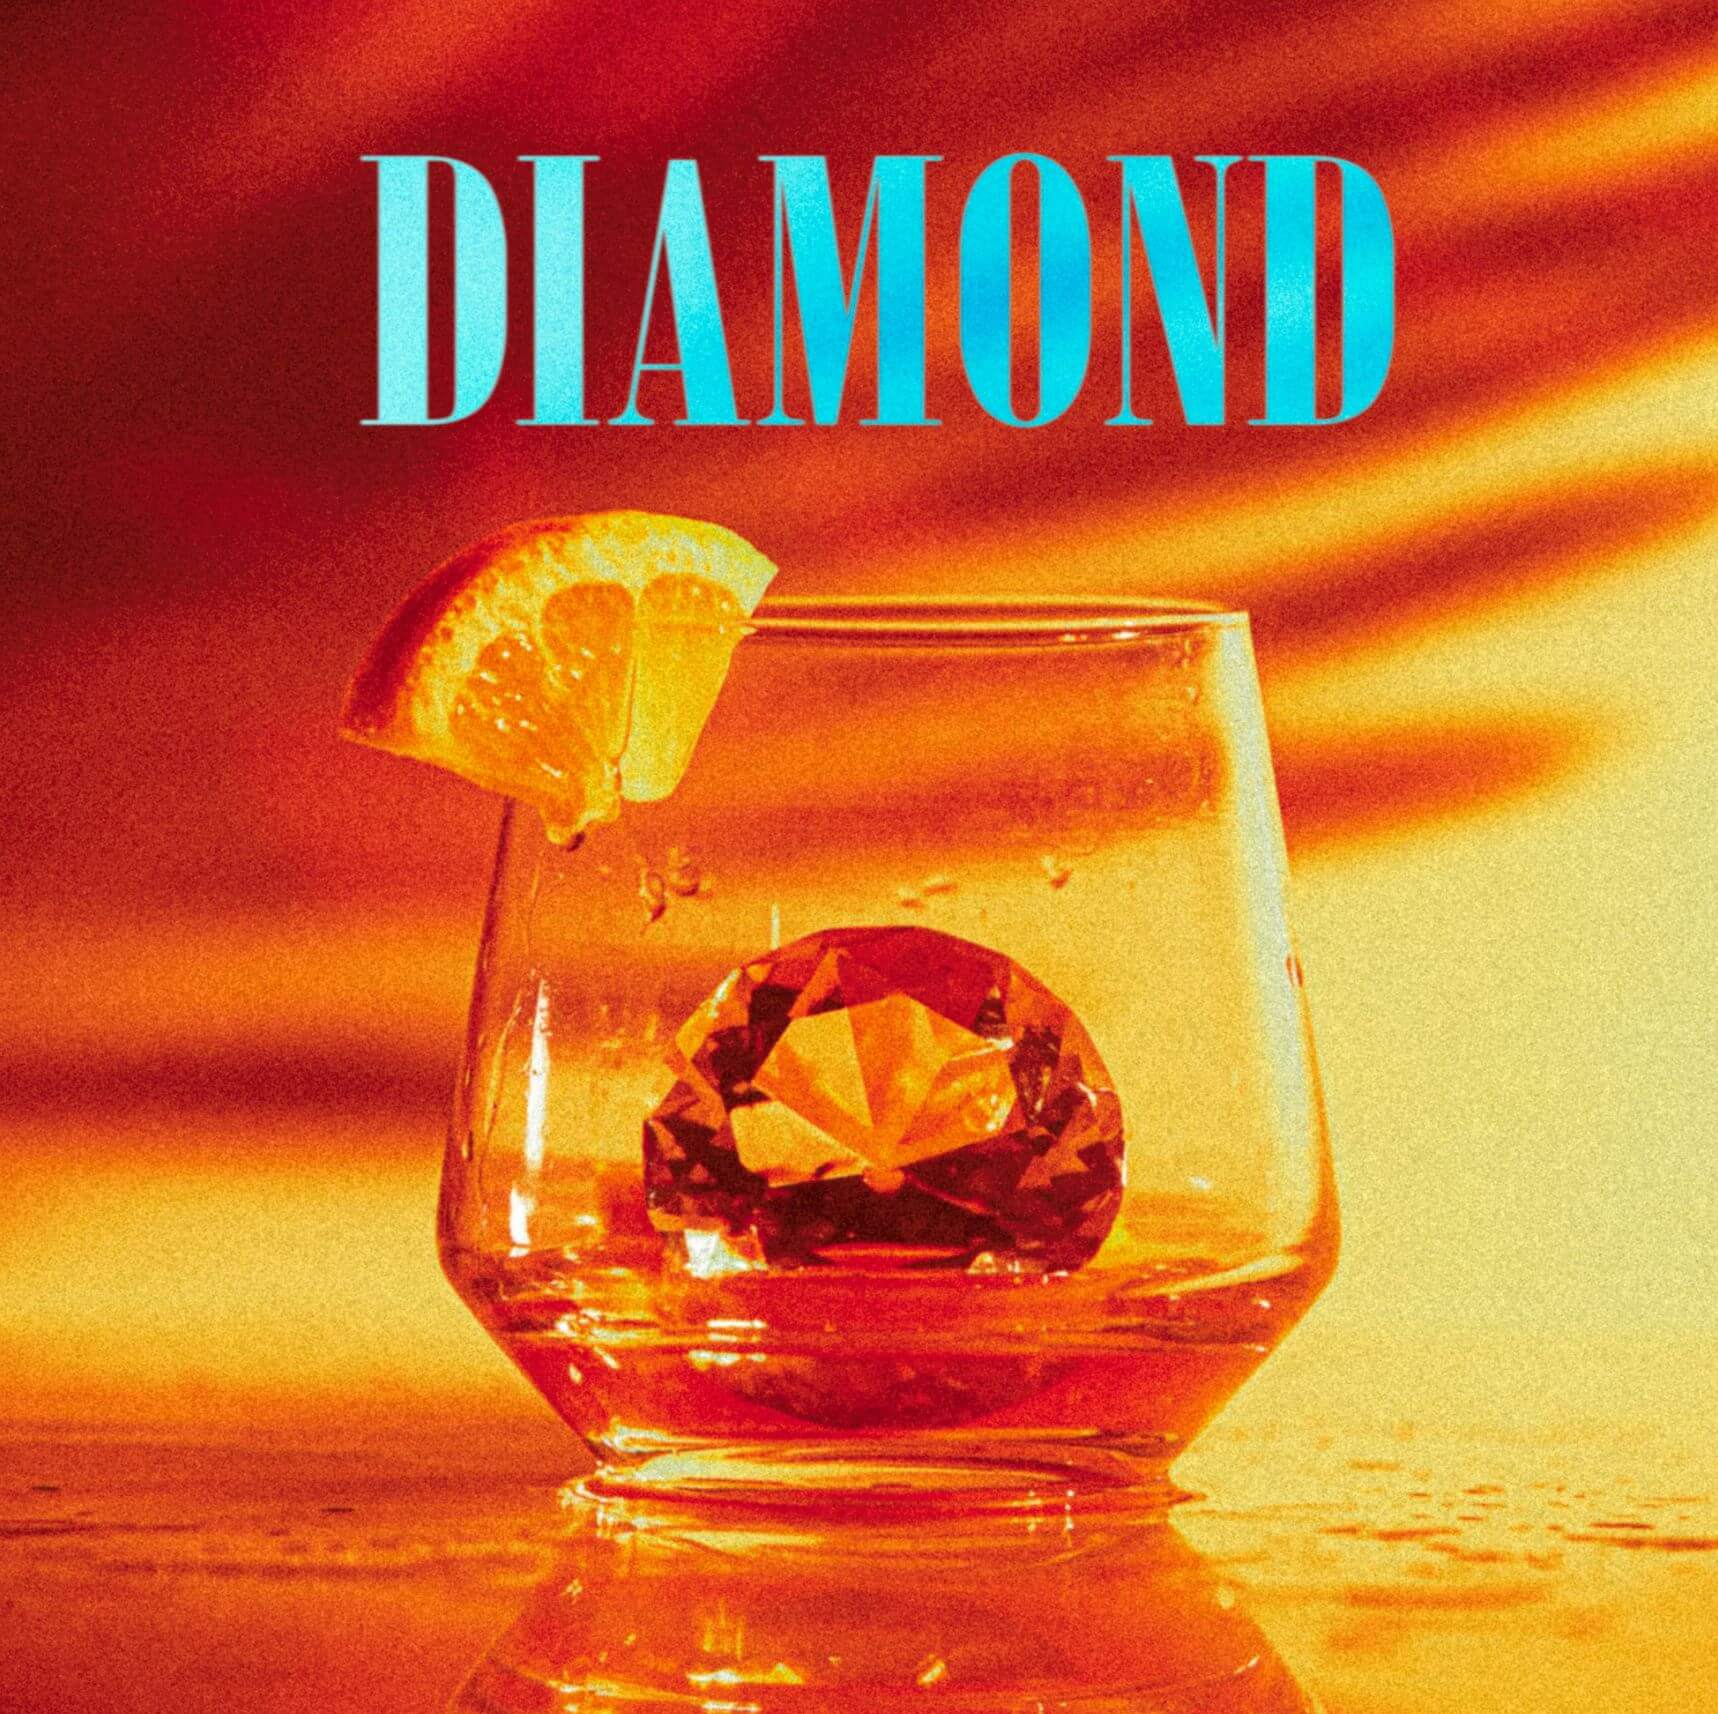 Featured image for “Diamond”